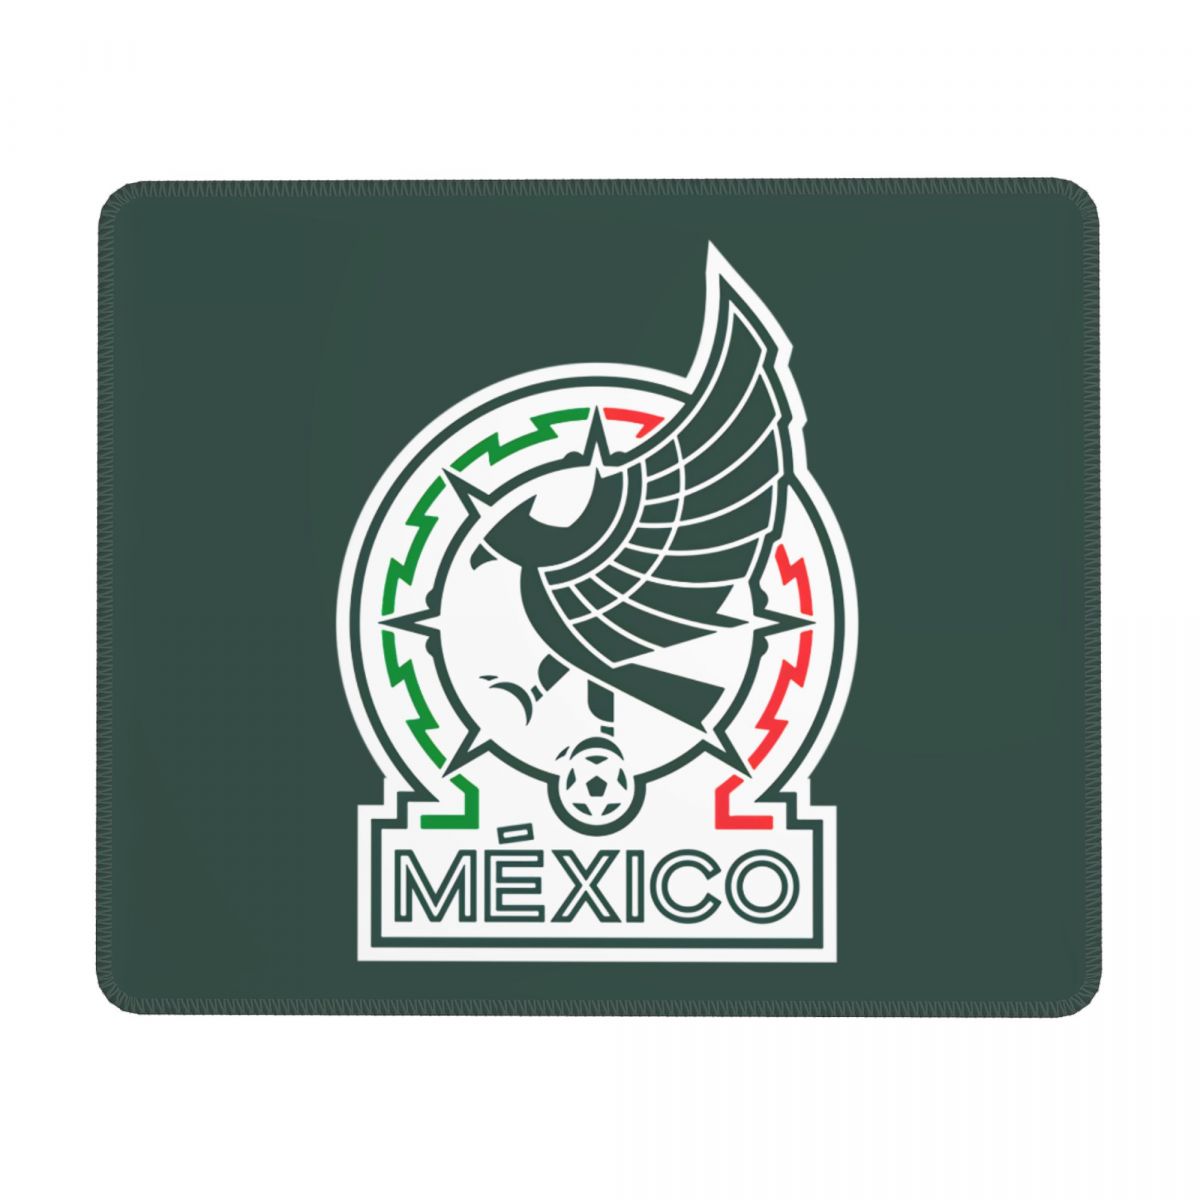 Mexico National Football Team Square Gaming Mouse Pad with Stitched Edge